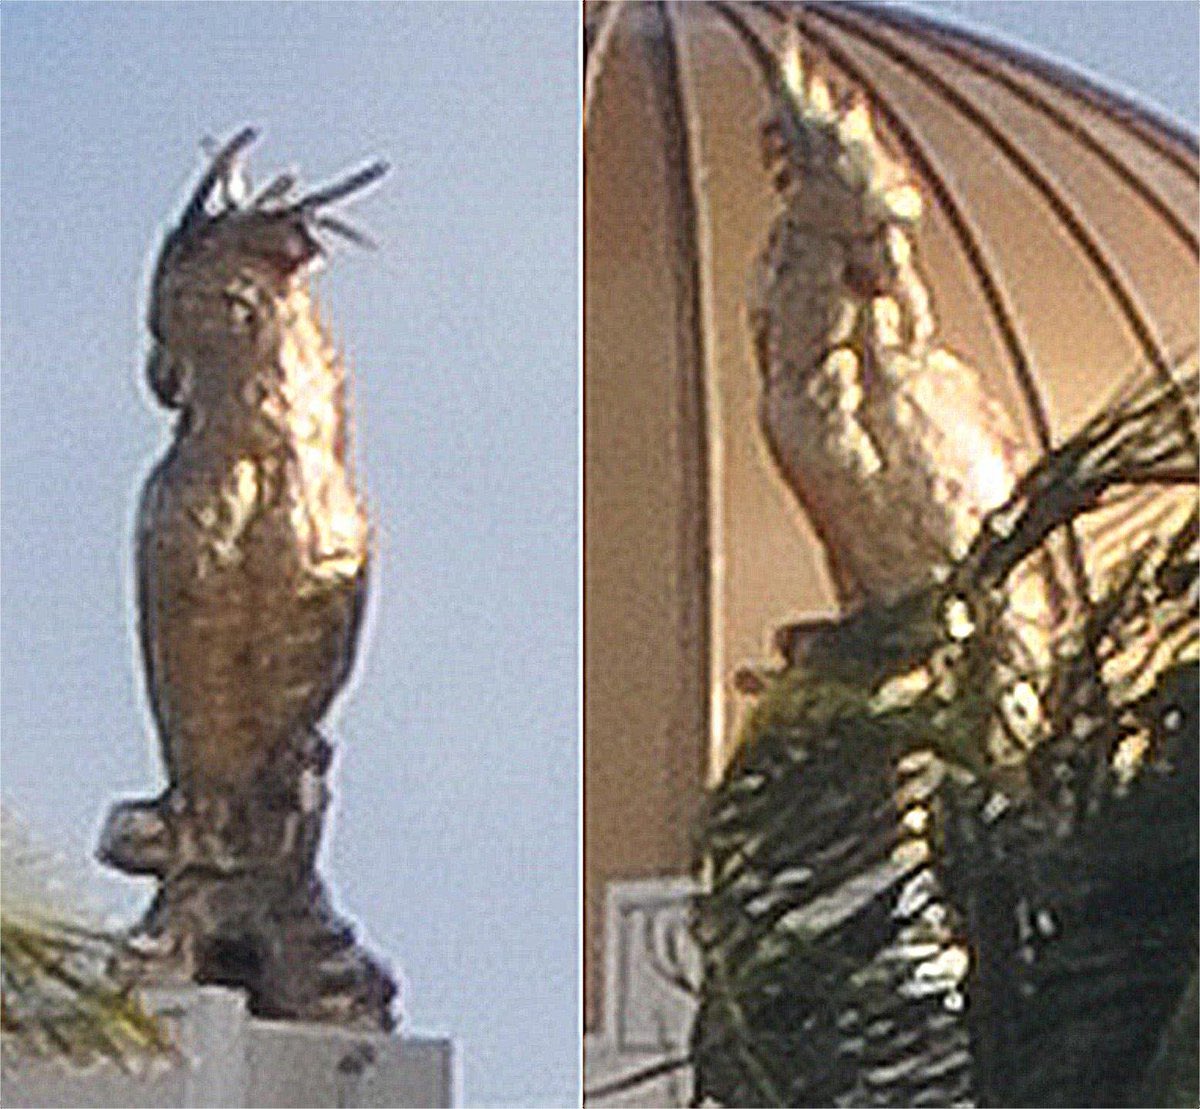 Some observers found a similar dual Cuckatoo statue in Loro Parque, Tenerife, a place which oddly enough has some indirect relationships to the Epstein network.Yet, of all the birds, why this bird ? Why not a stork, an eagle, an owl ?